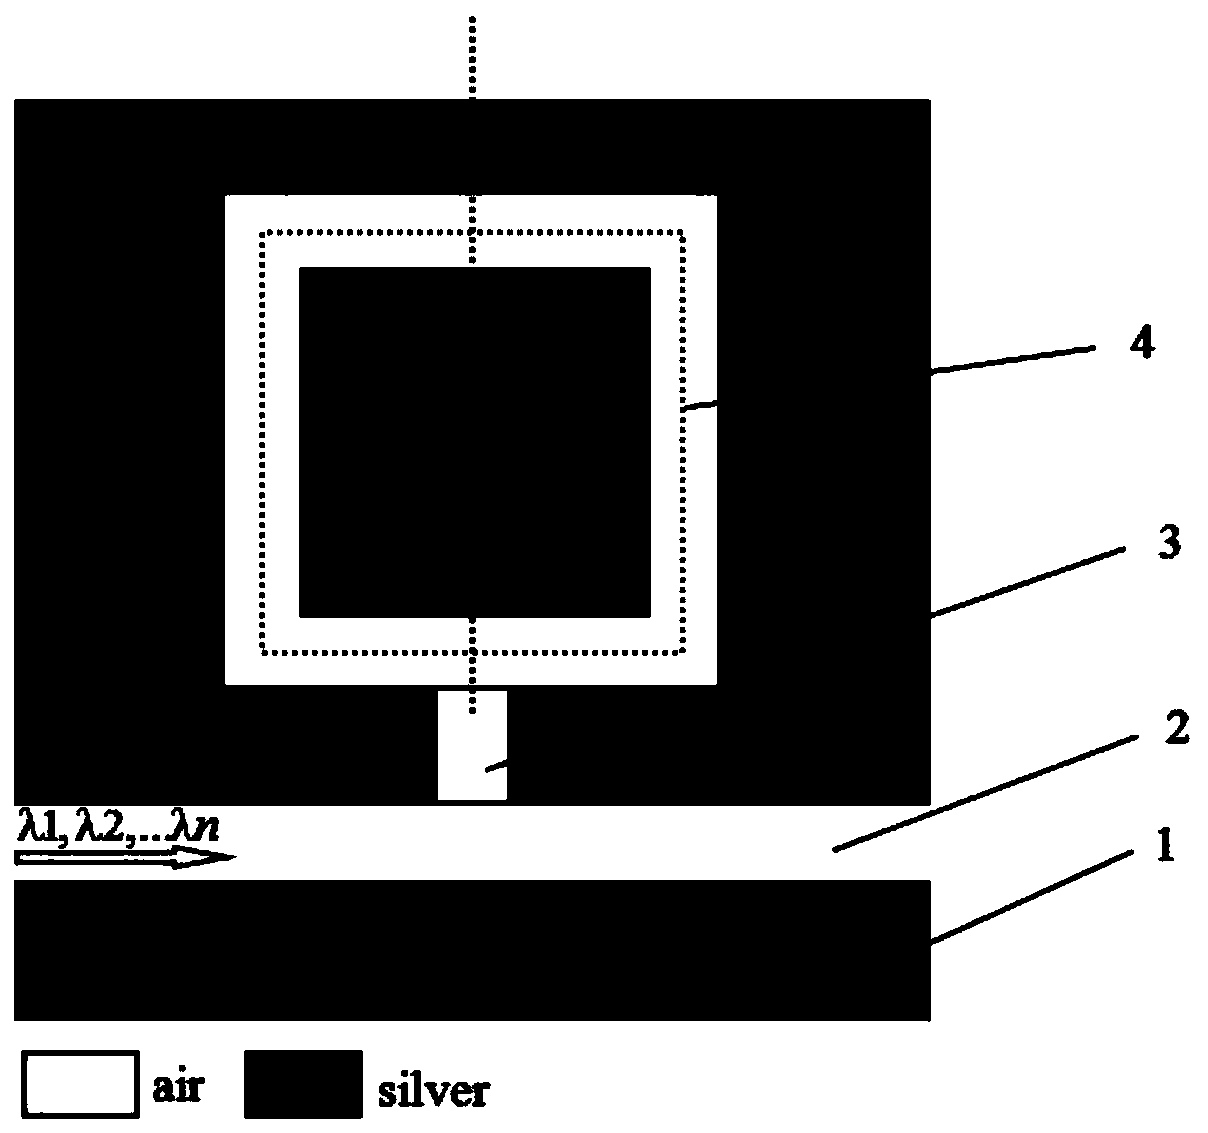 Surface plasma filter based on connection bridge of rectangular ring resonant cavity and incident waveguide